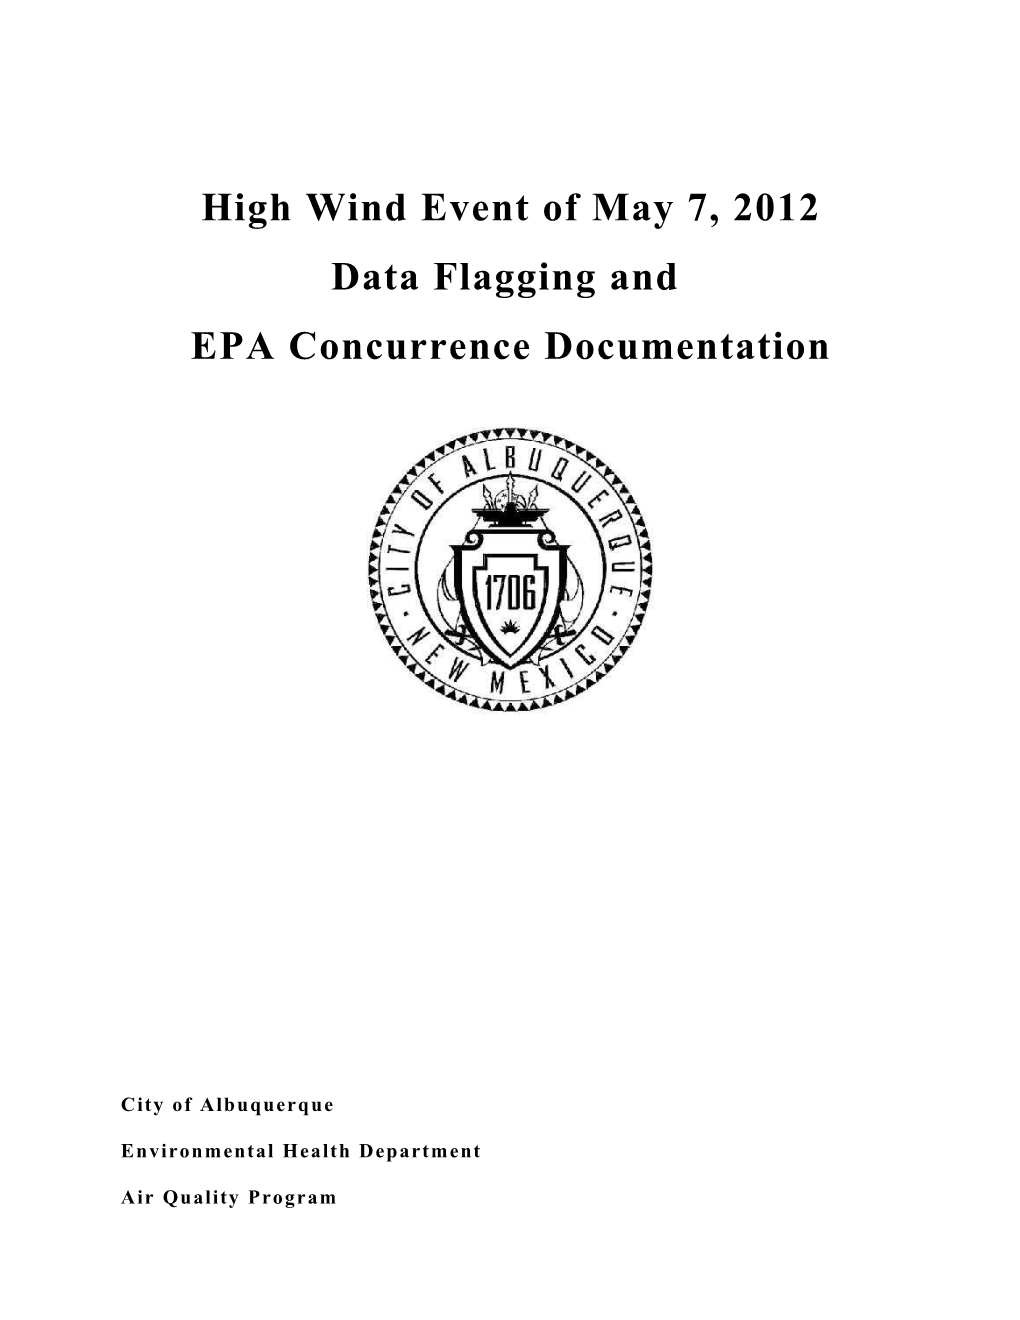 High Wind Event of June 6Th, 2007